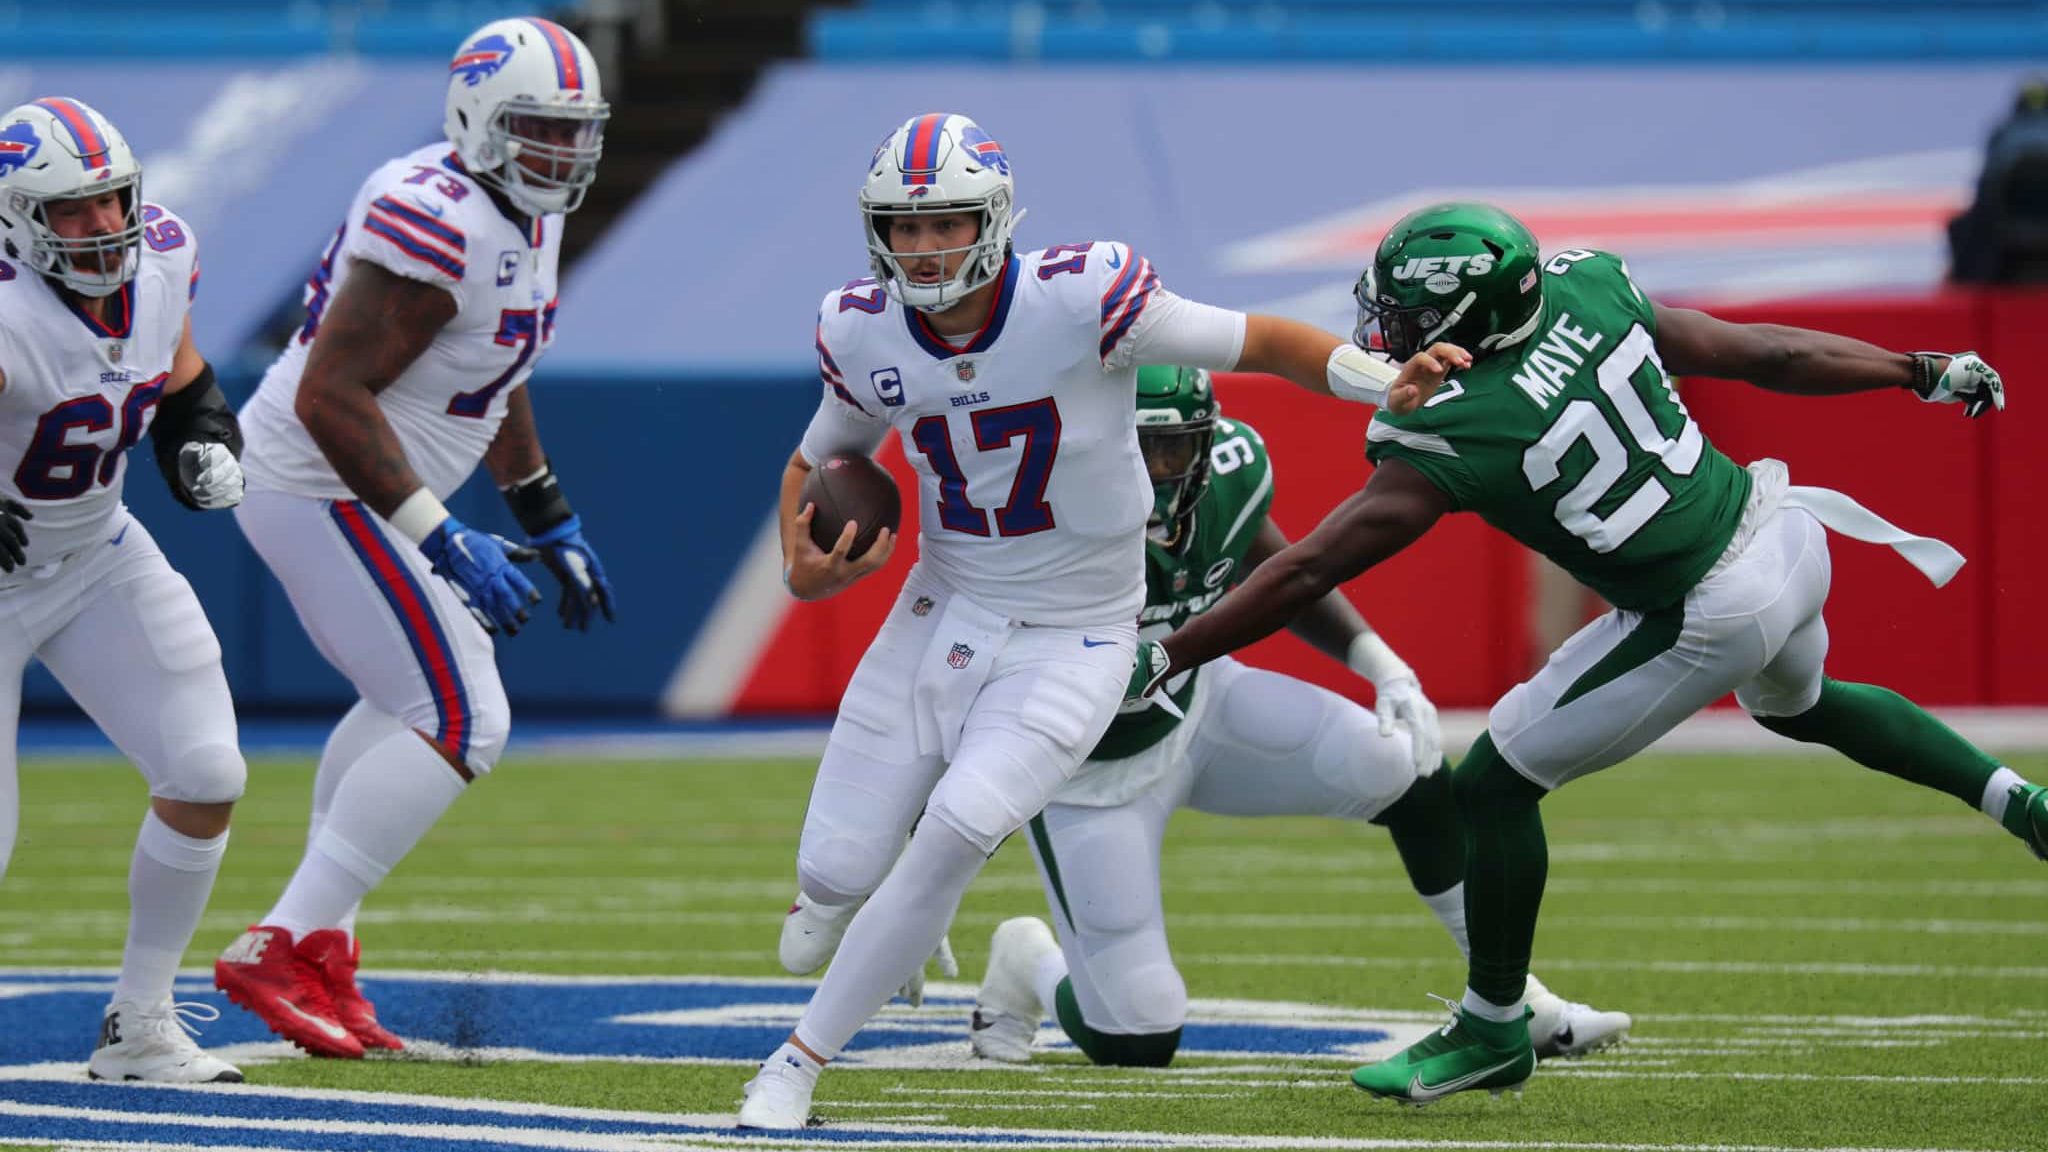 ORCHARD PARK, NY - SEPTEMBER 13: Marcus Maye #20 of the New York Jets tries to make a tackle as Josh Allen #17 of the Buffalo Bills runs the ball during the first quarter at Bills Stadium on September 13, 2020 in Orchard Park, New York.